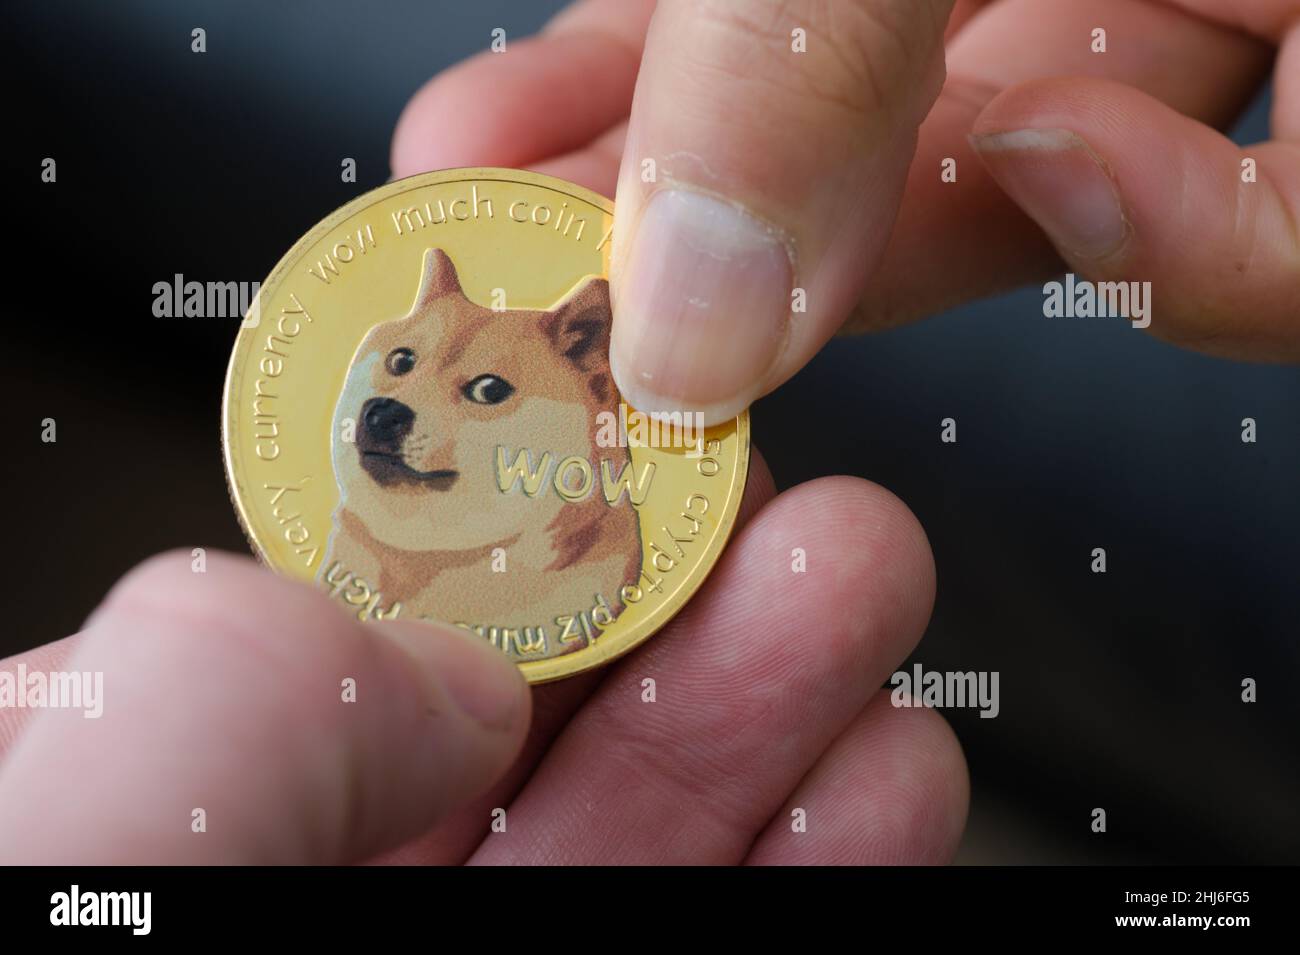 Dogecoin cryptocurrency coin held in a hand. Dogecoin is a cryptocurrency, a digital currency. Stock Photo